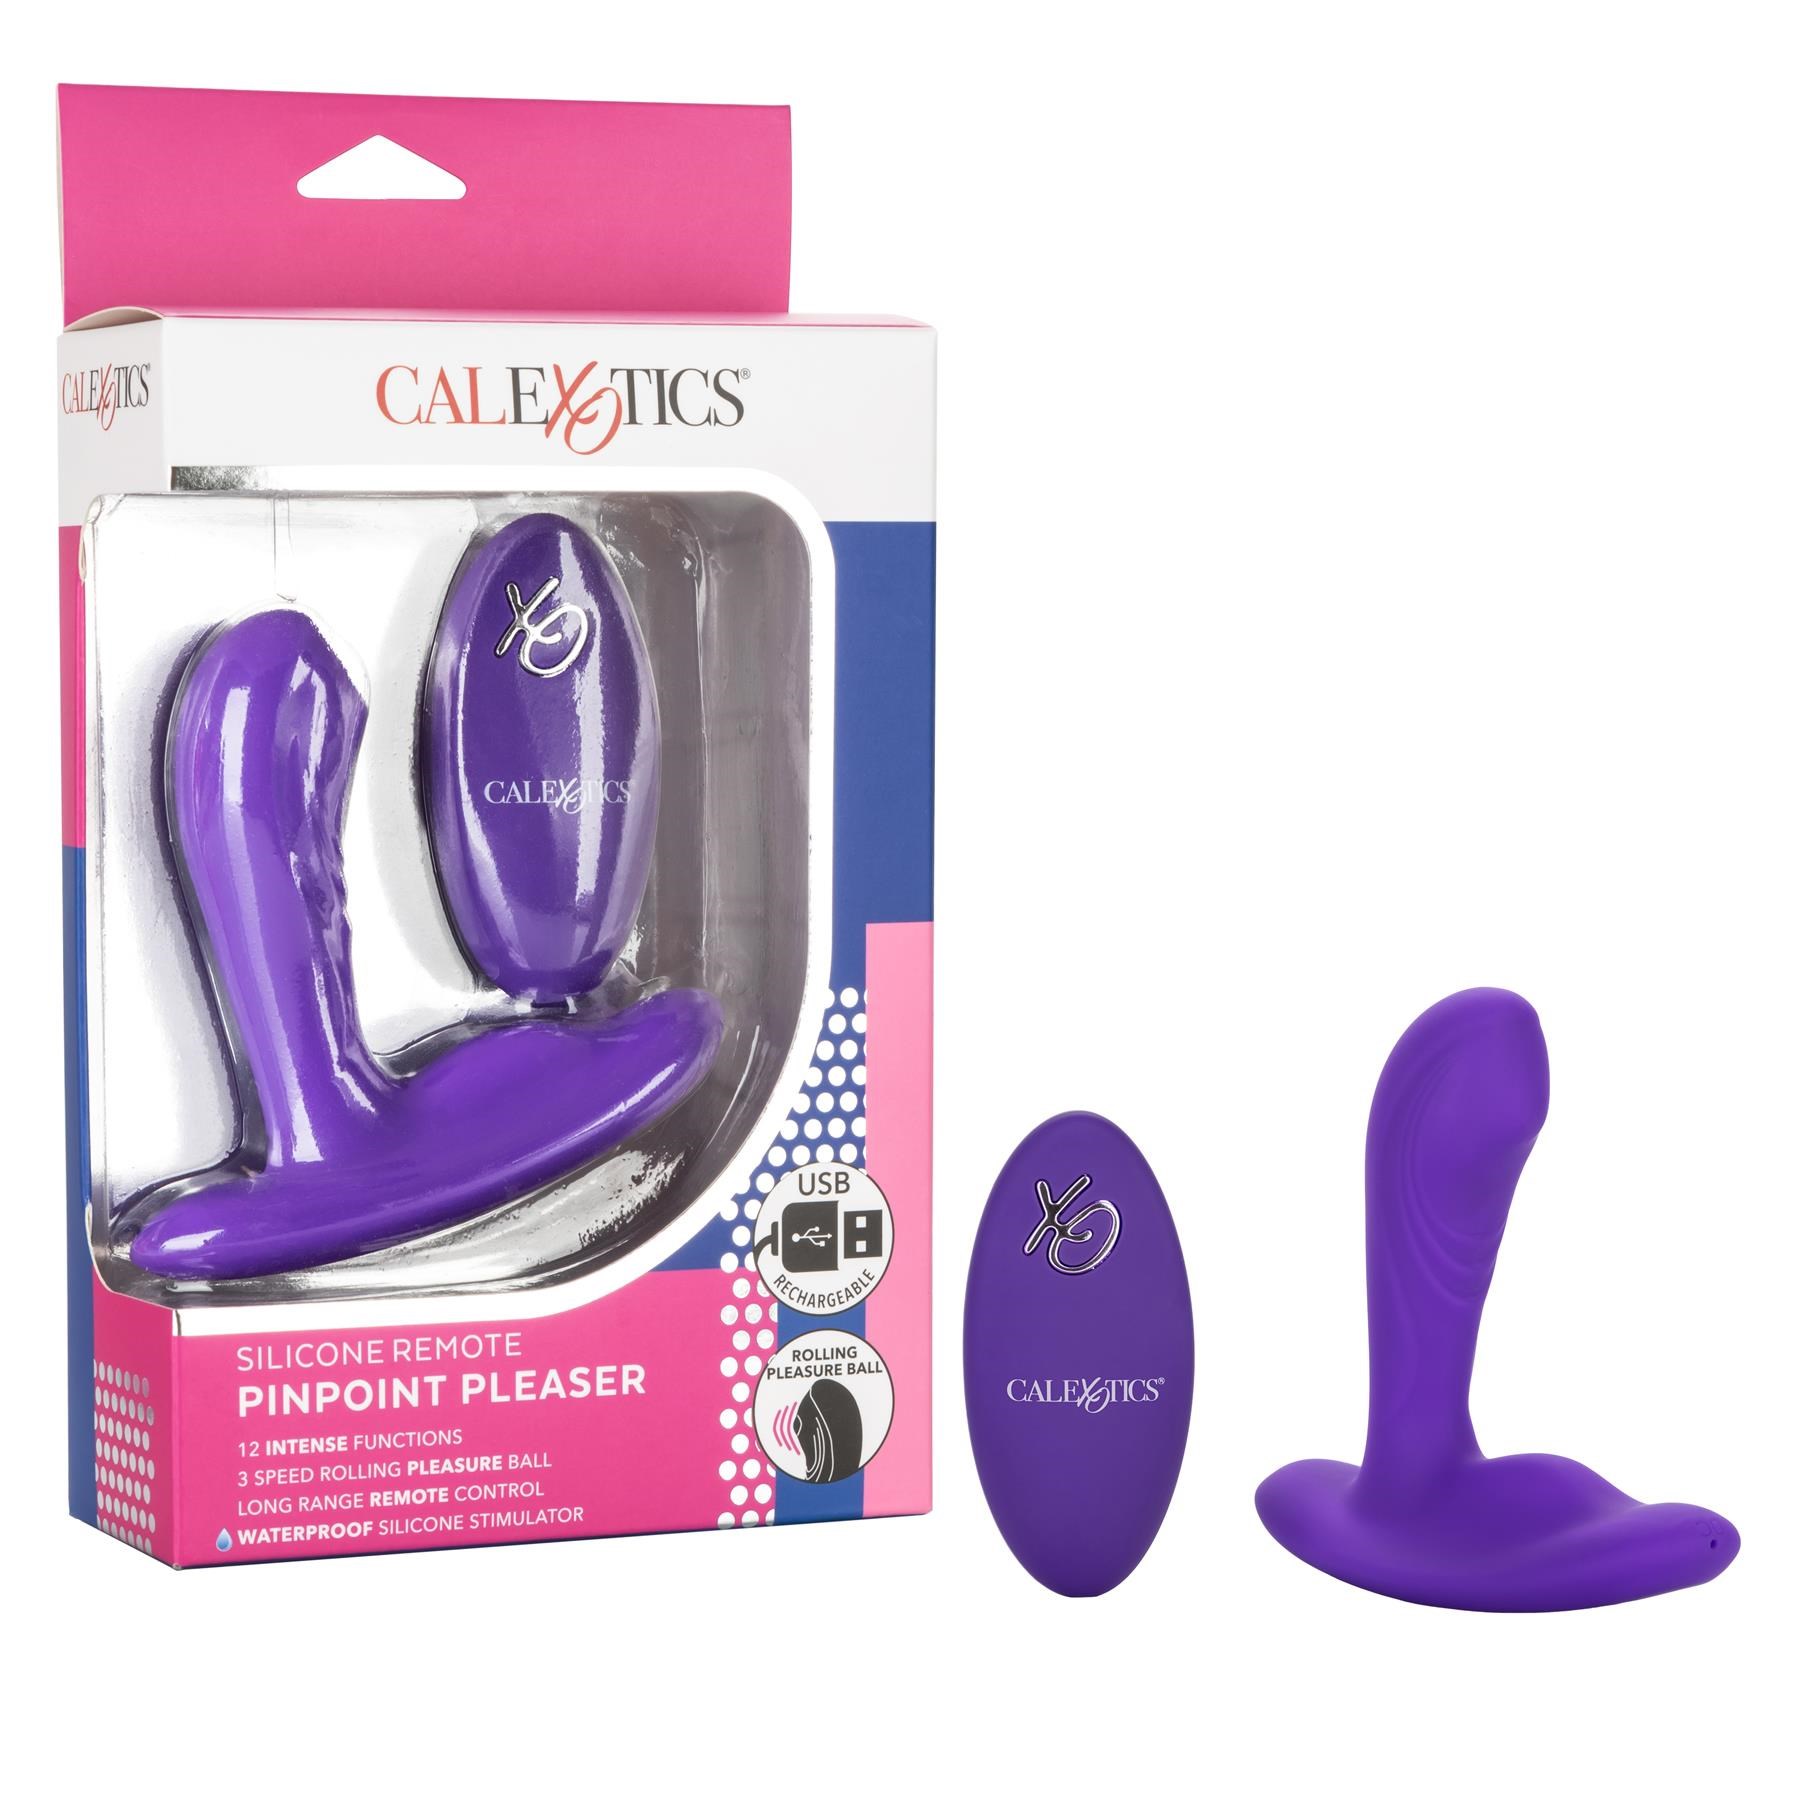 Silicone Remote Pinpoint Pleaser - Product and Packaging